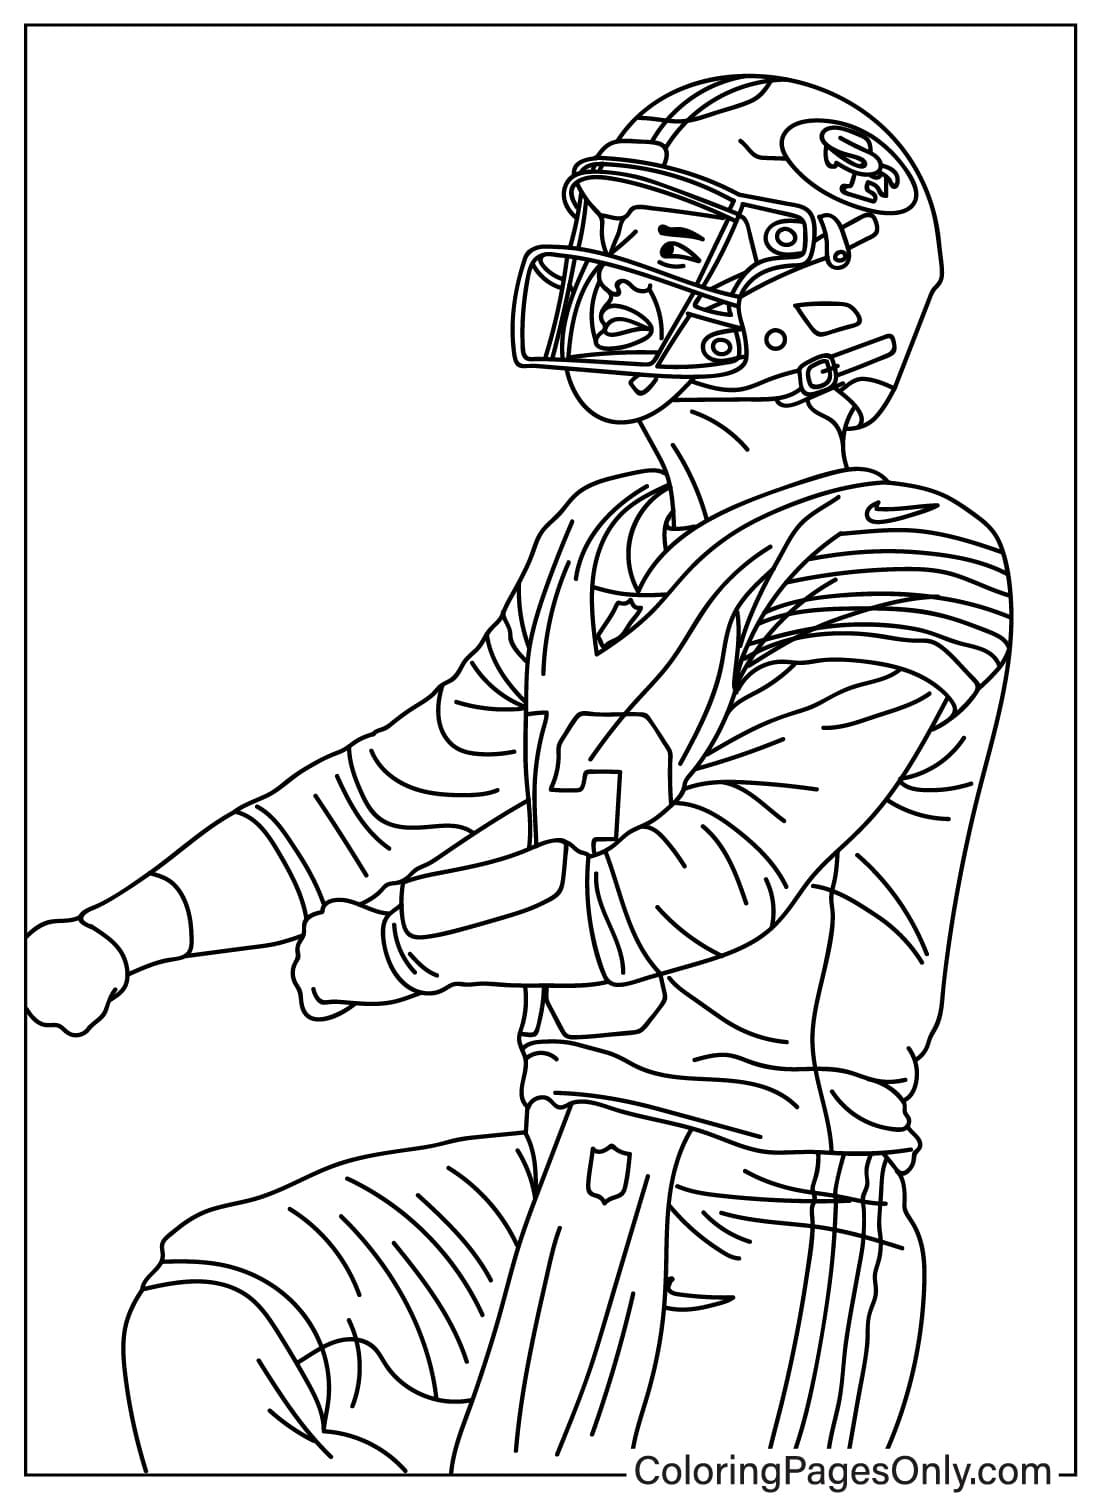 Brock Purdy Coloring Page - Free Printable Coloring Pages